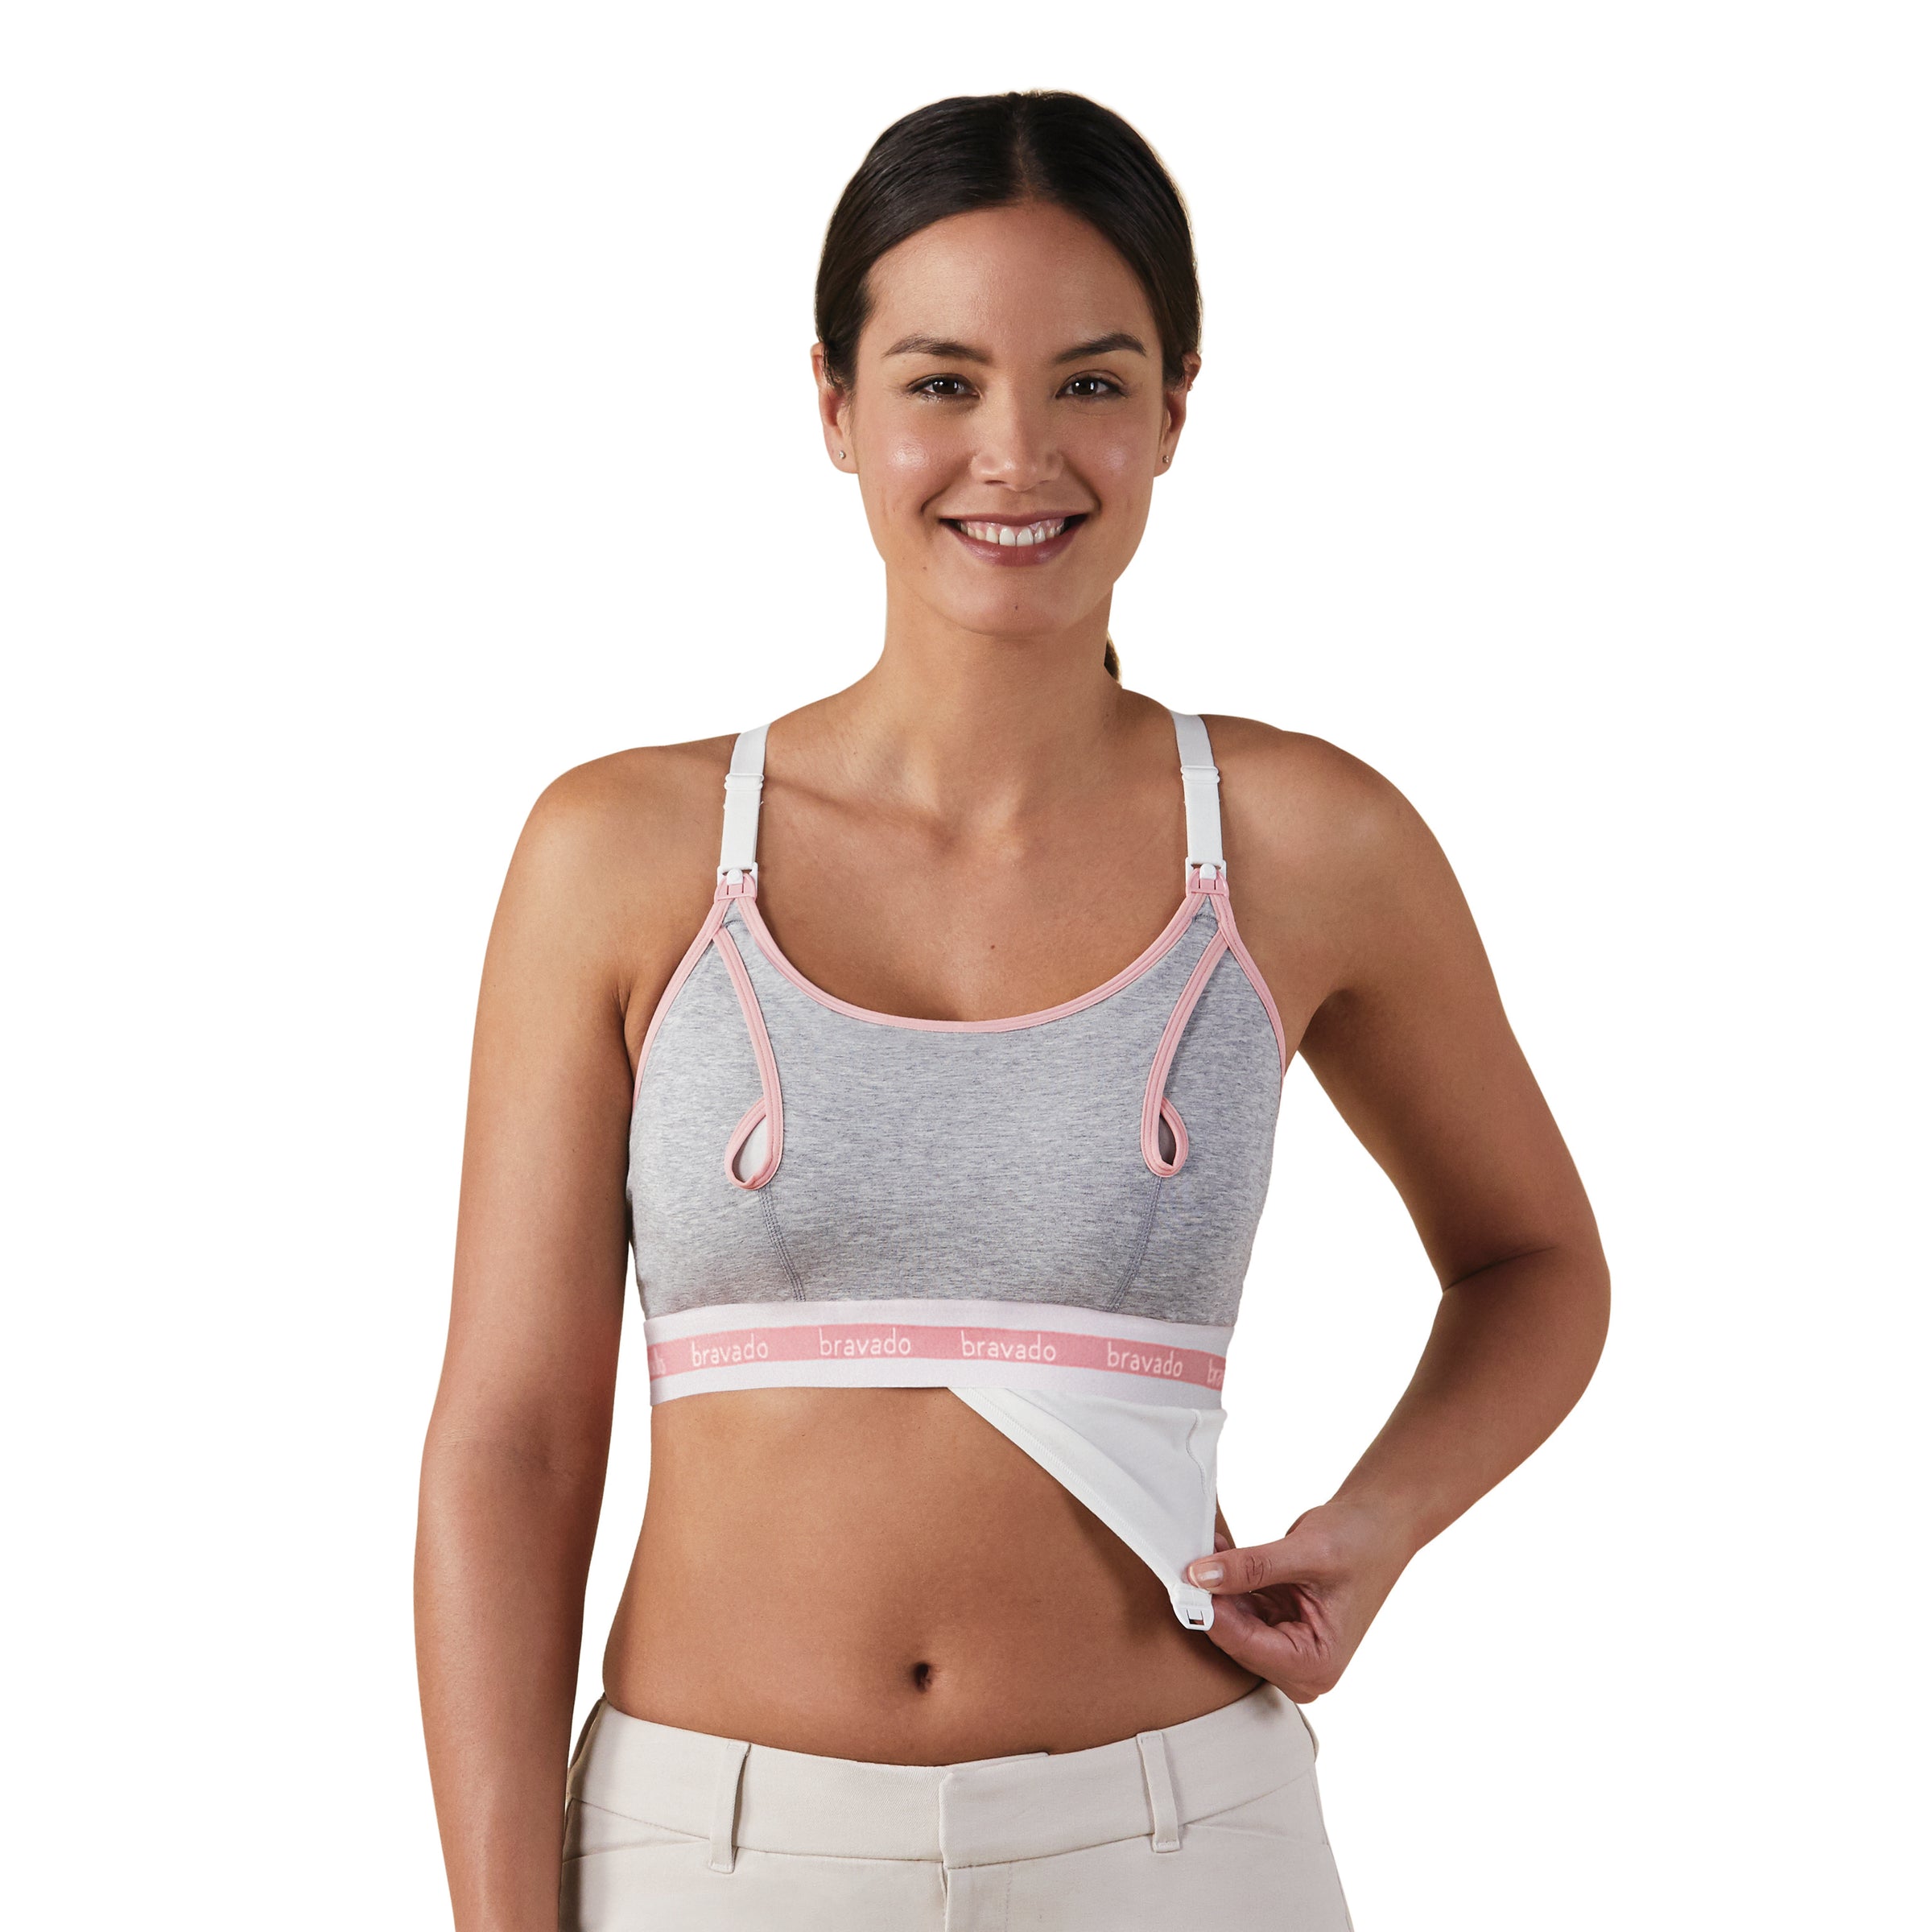 Maternity Bra Sale - Get 5 for $69 and Save $76 on our Nursing Bras [Video]  [Video]